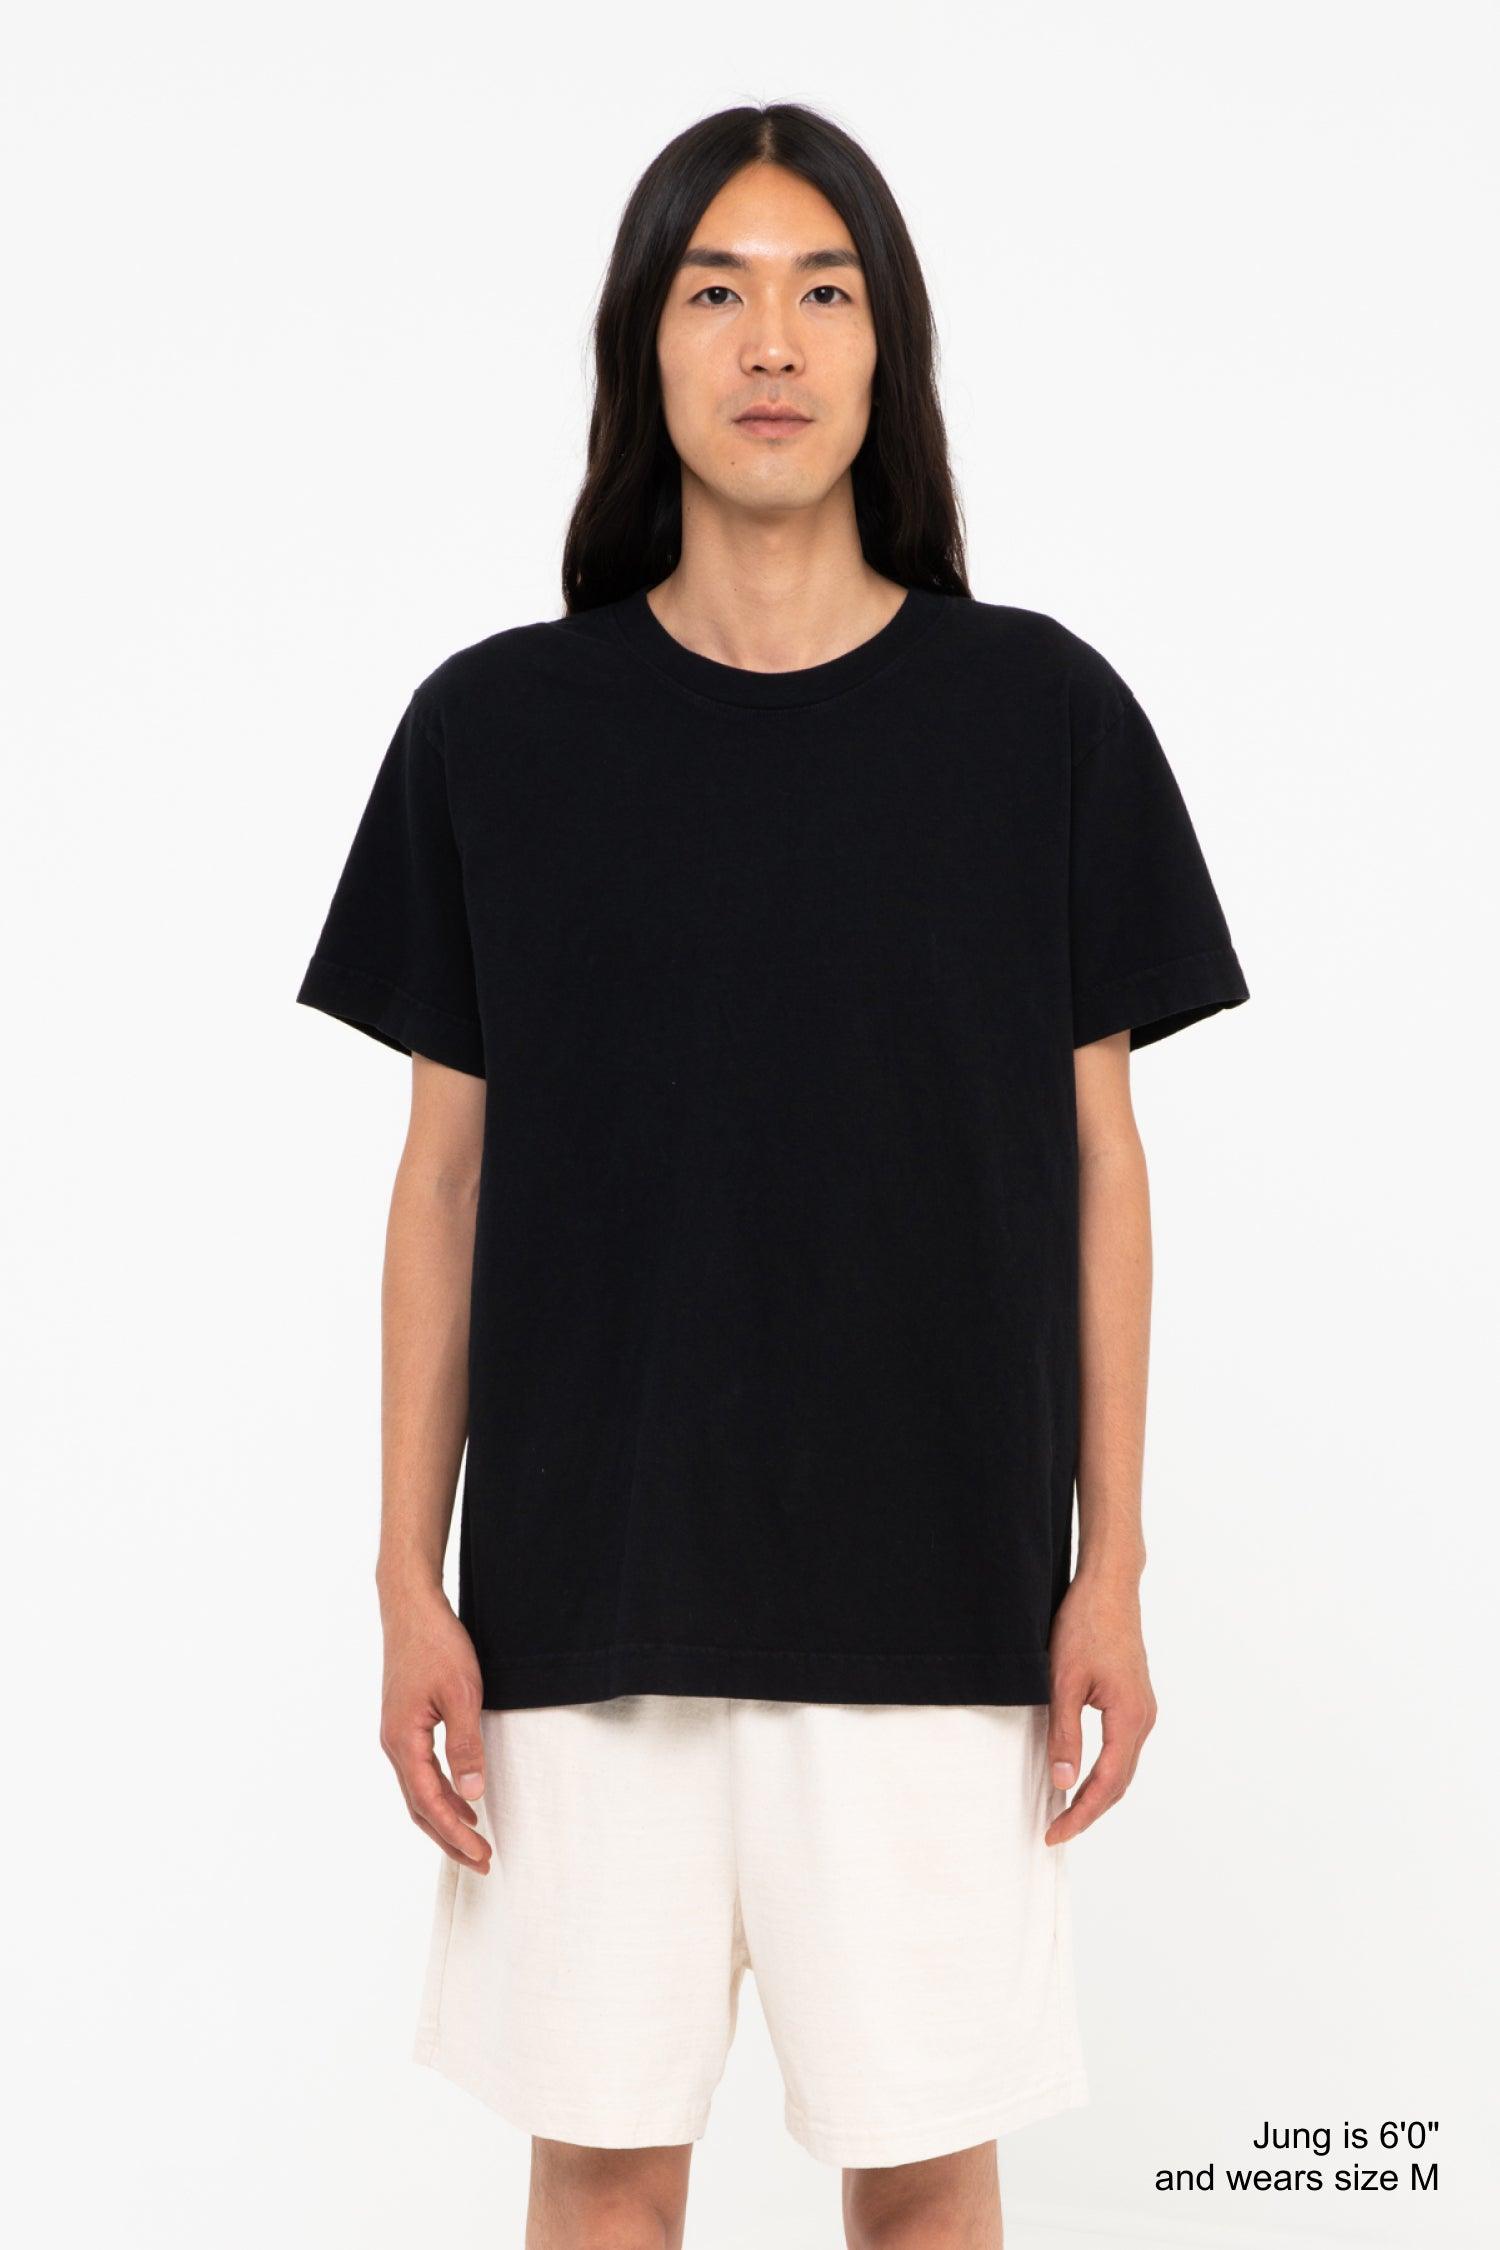 Relaxed Fit Exposed Seam Tee